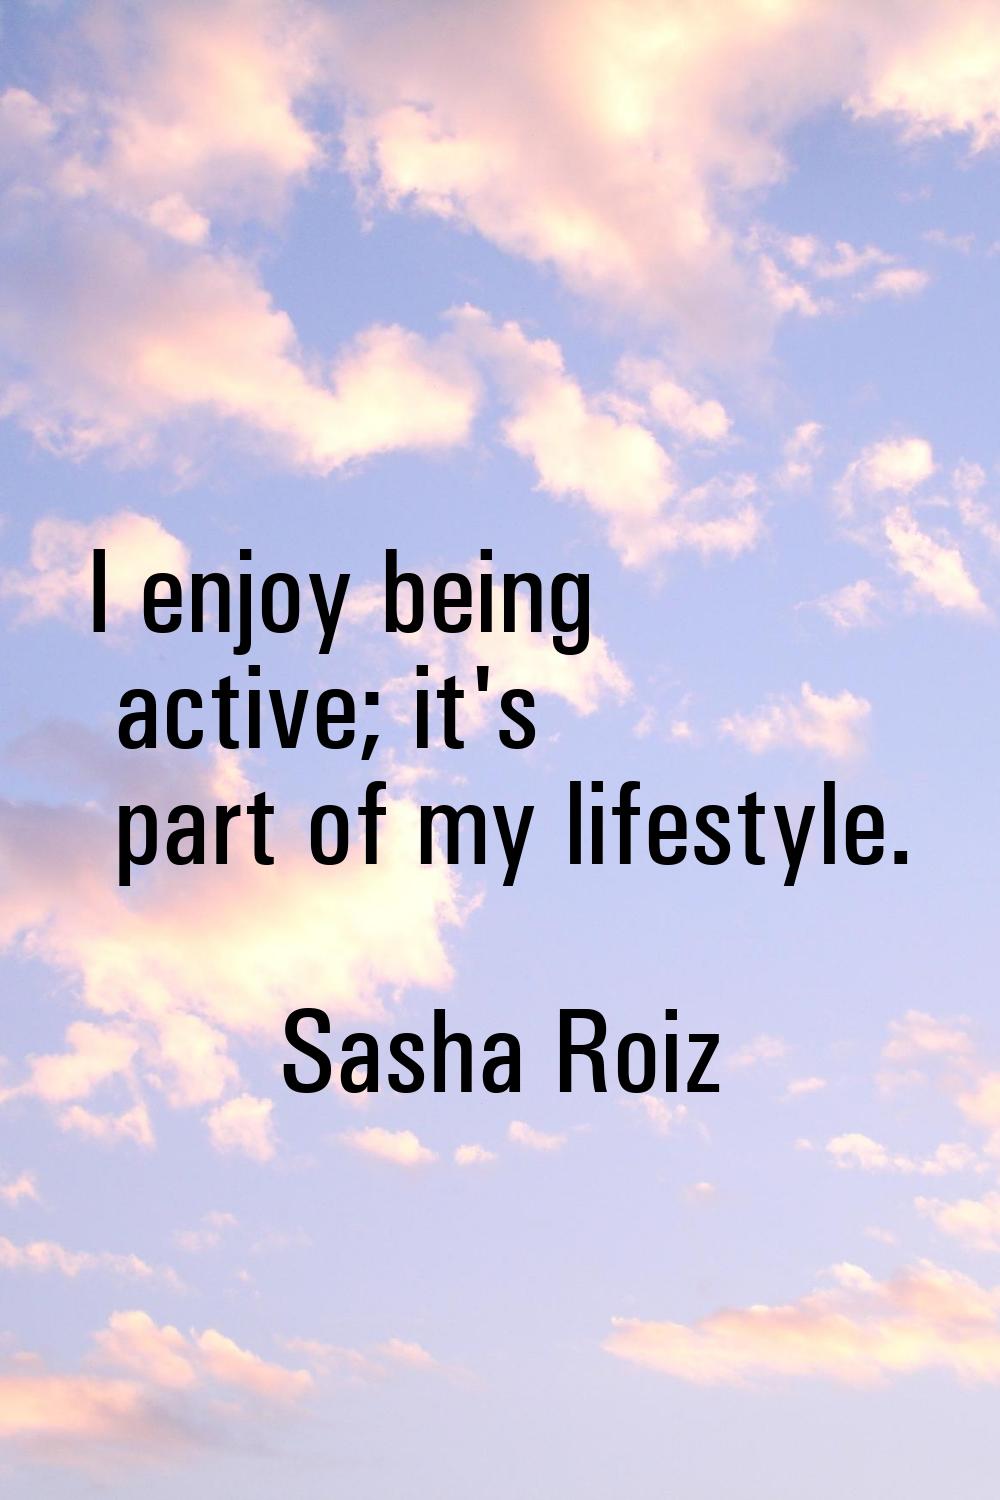 I enjoy being active; it's part of my lifestyle.